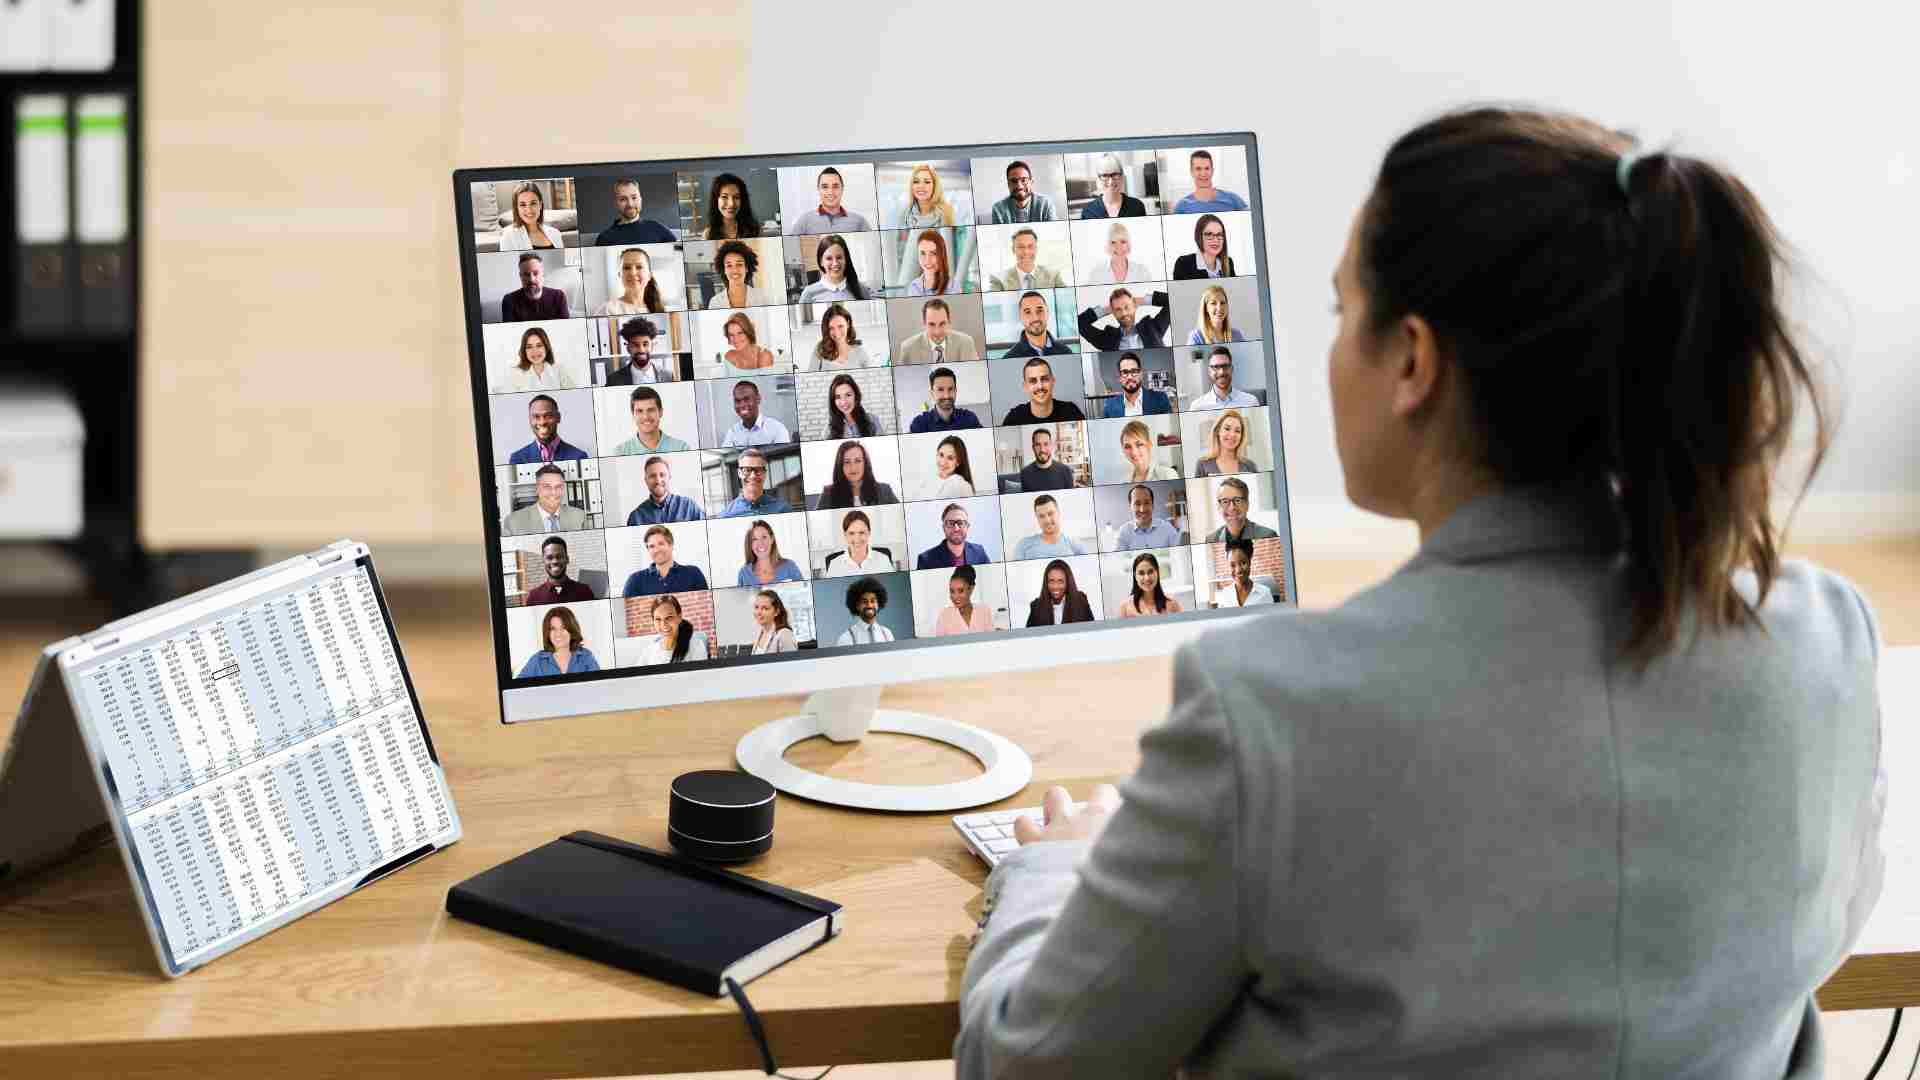 How to Keep Uninvited Guests Out of Your Zoom Meeting